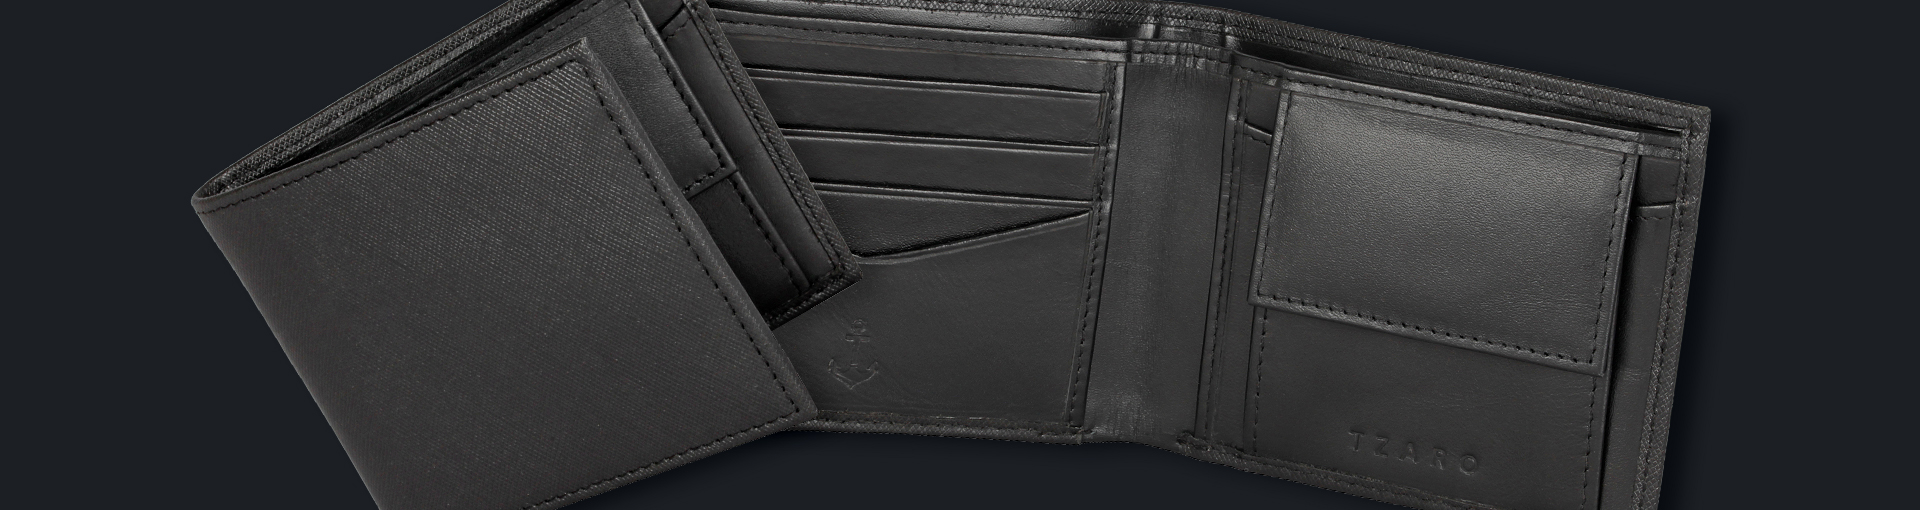 Importance of interlining layer in wallet making